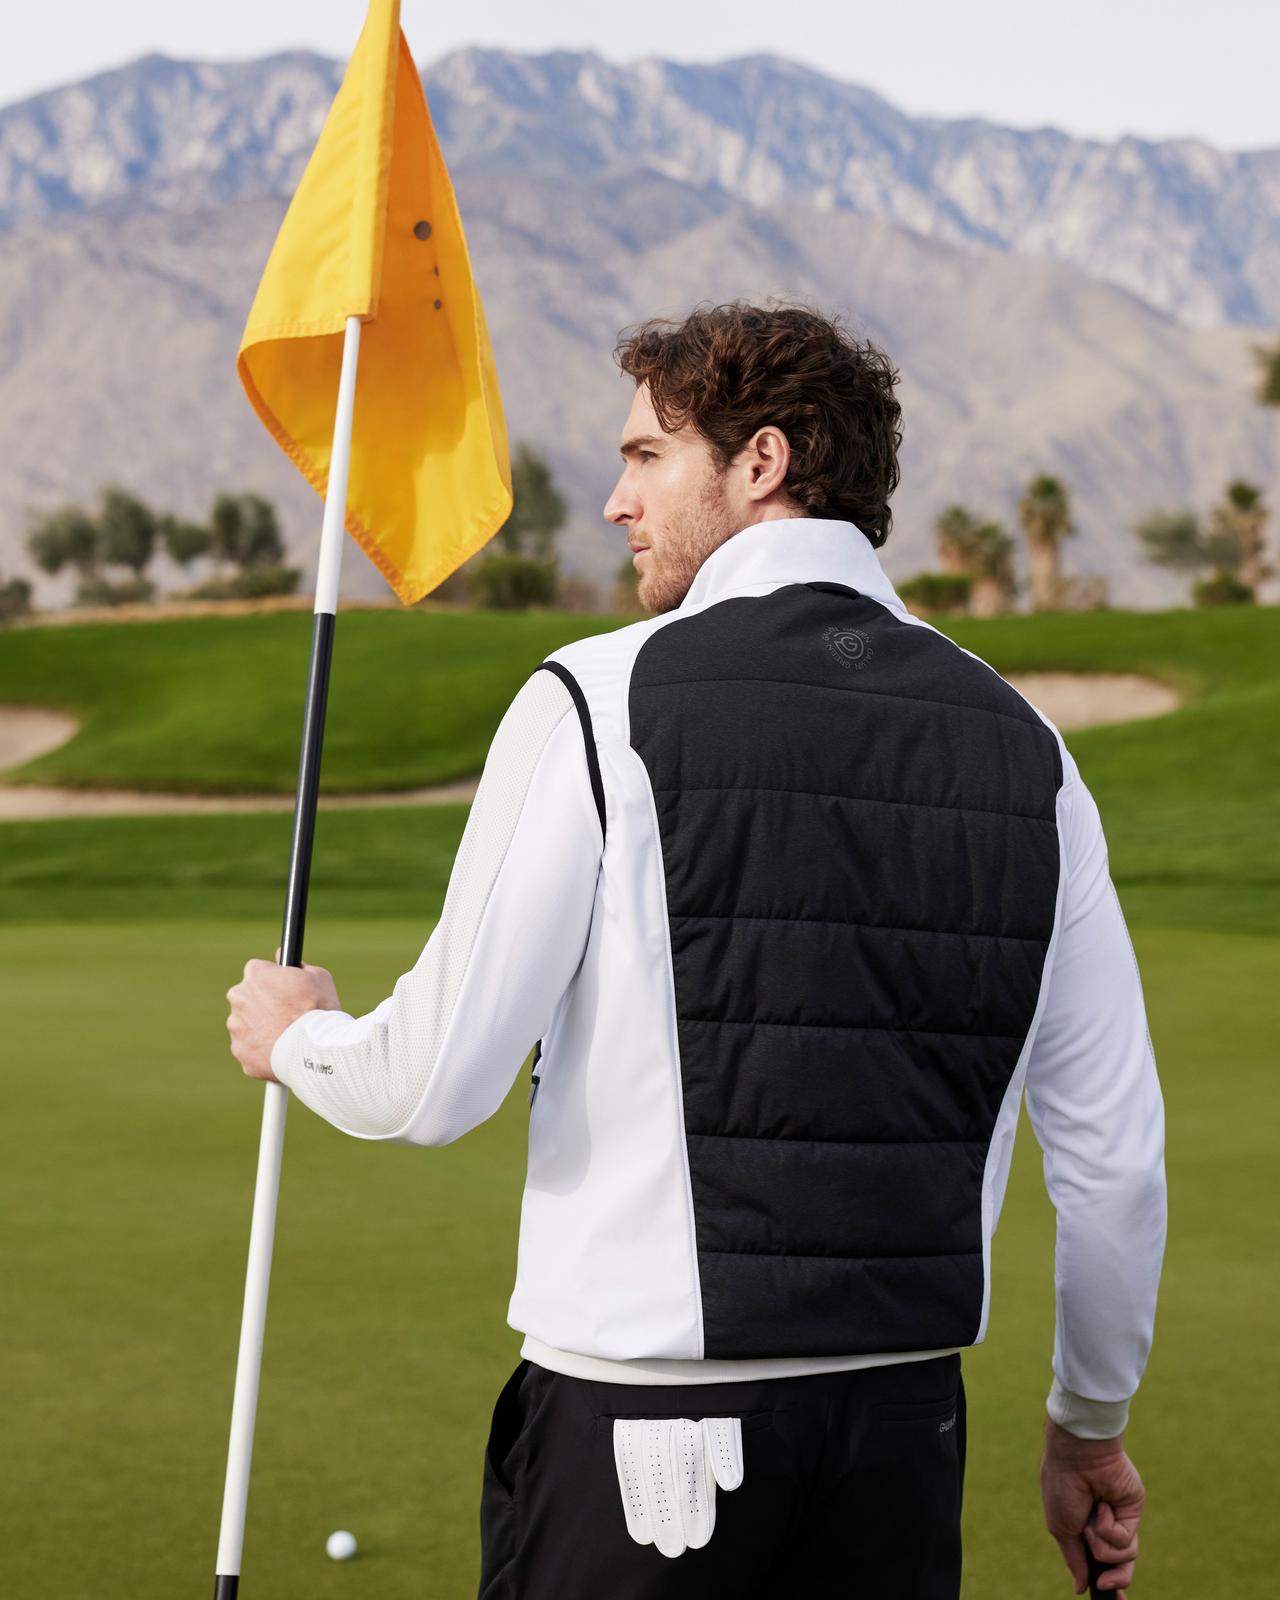 male golfer facing back, holding a flag, wearing a vest, sweater and shorts